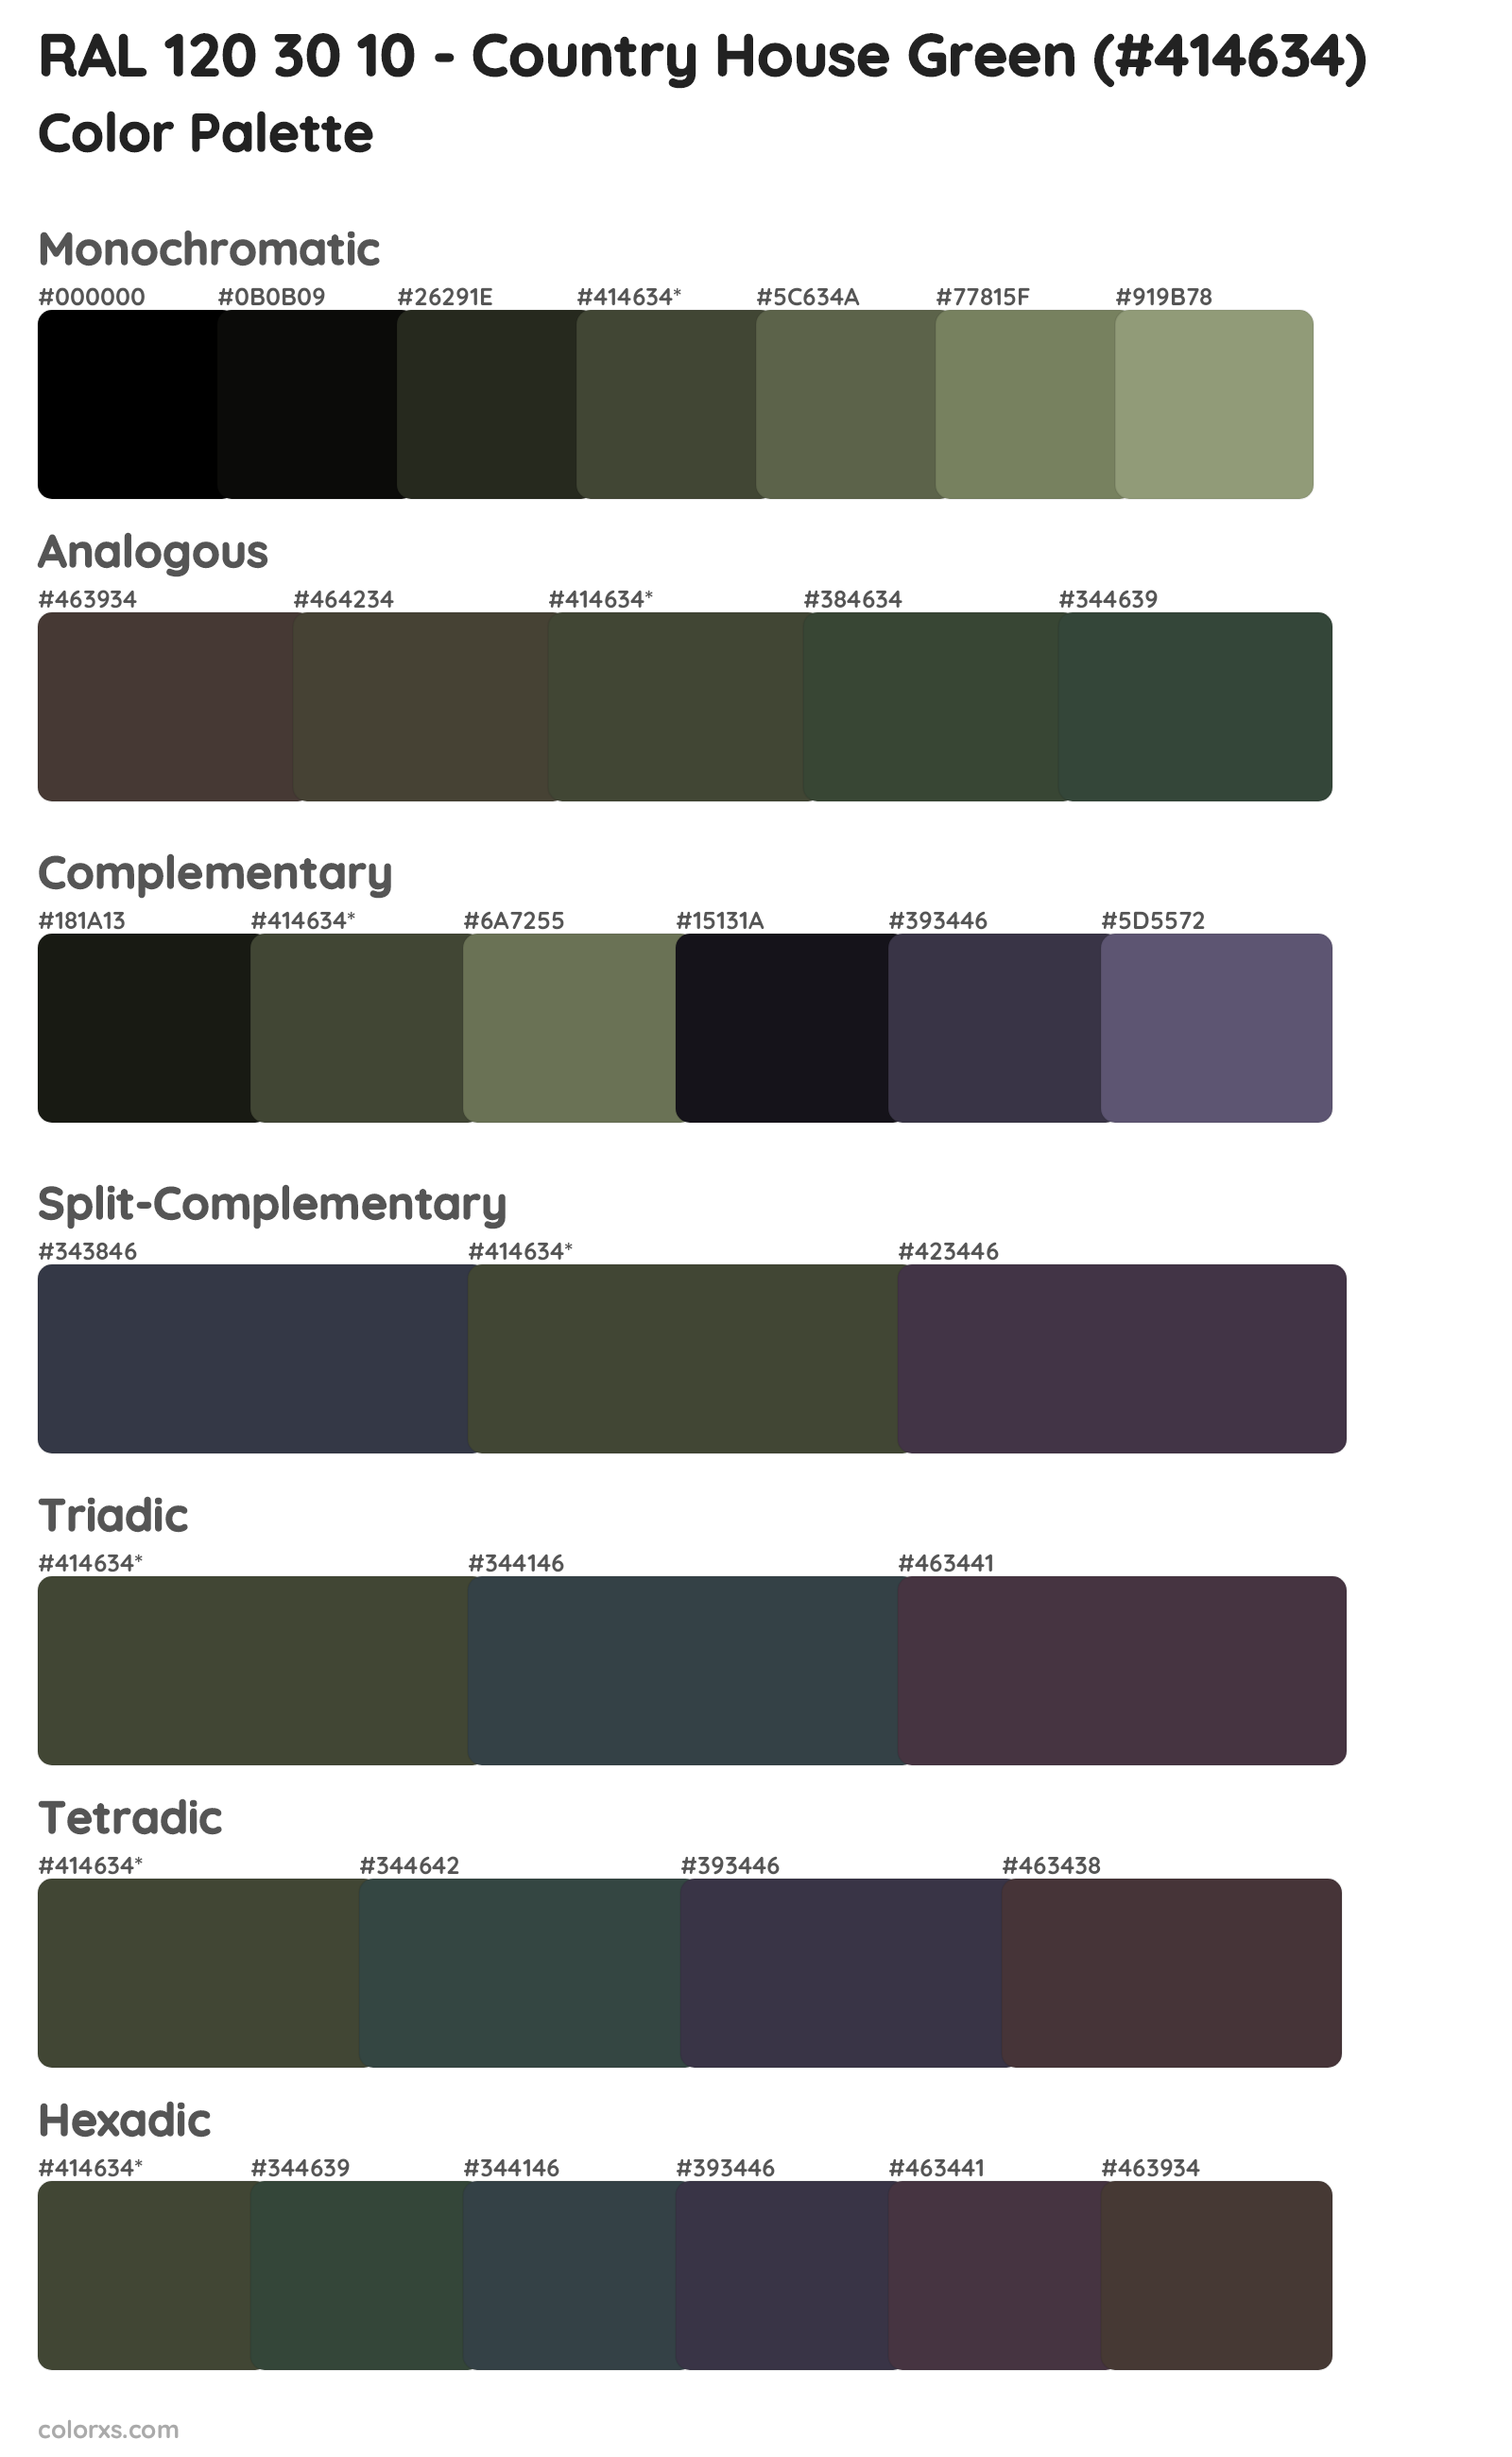 RAL 120 30 10 - Country House Green Color Scheme Palettes